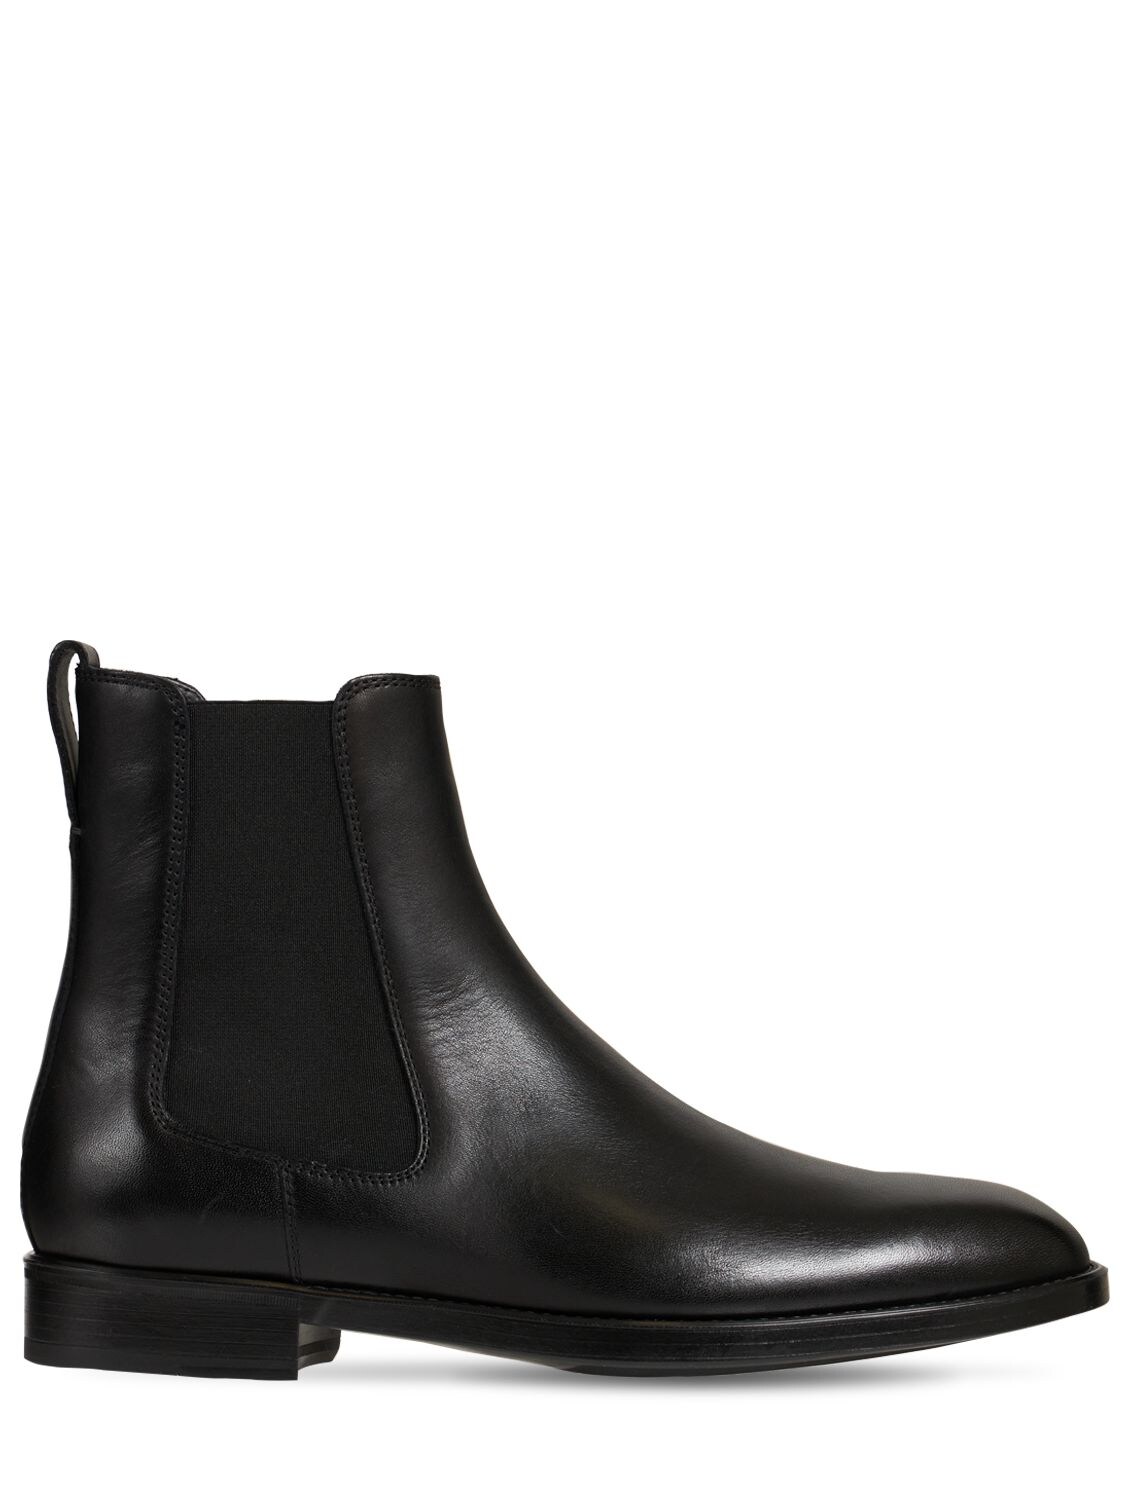 TOM FORD LEATHER ANKLE BOOTS